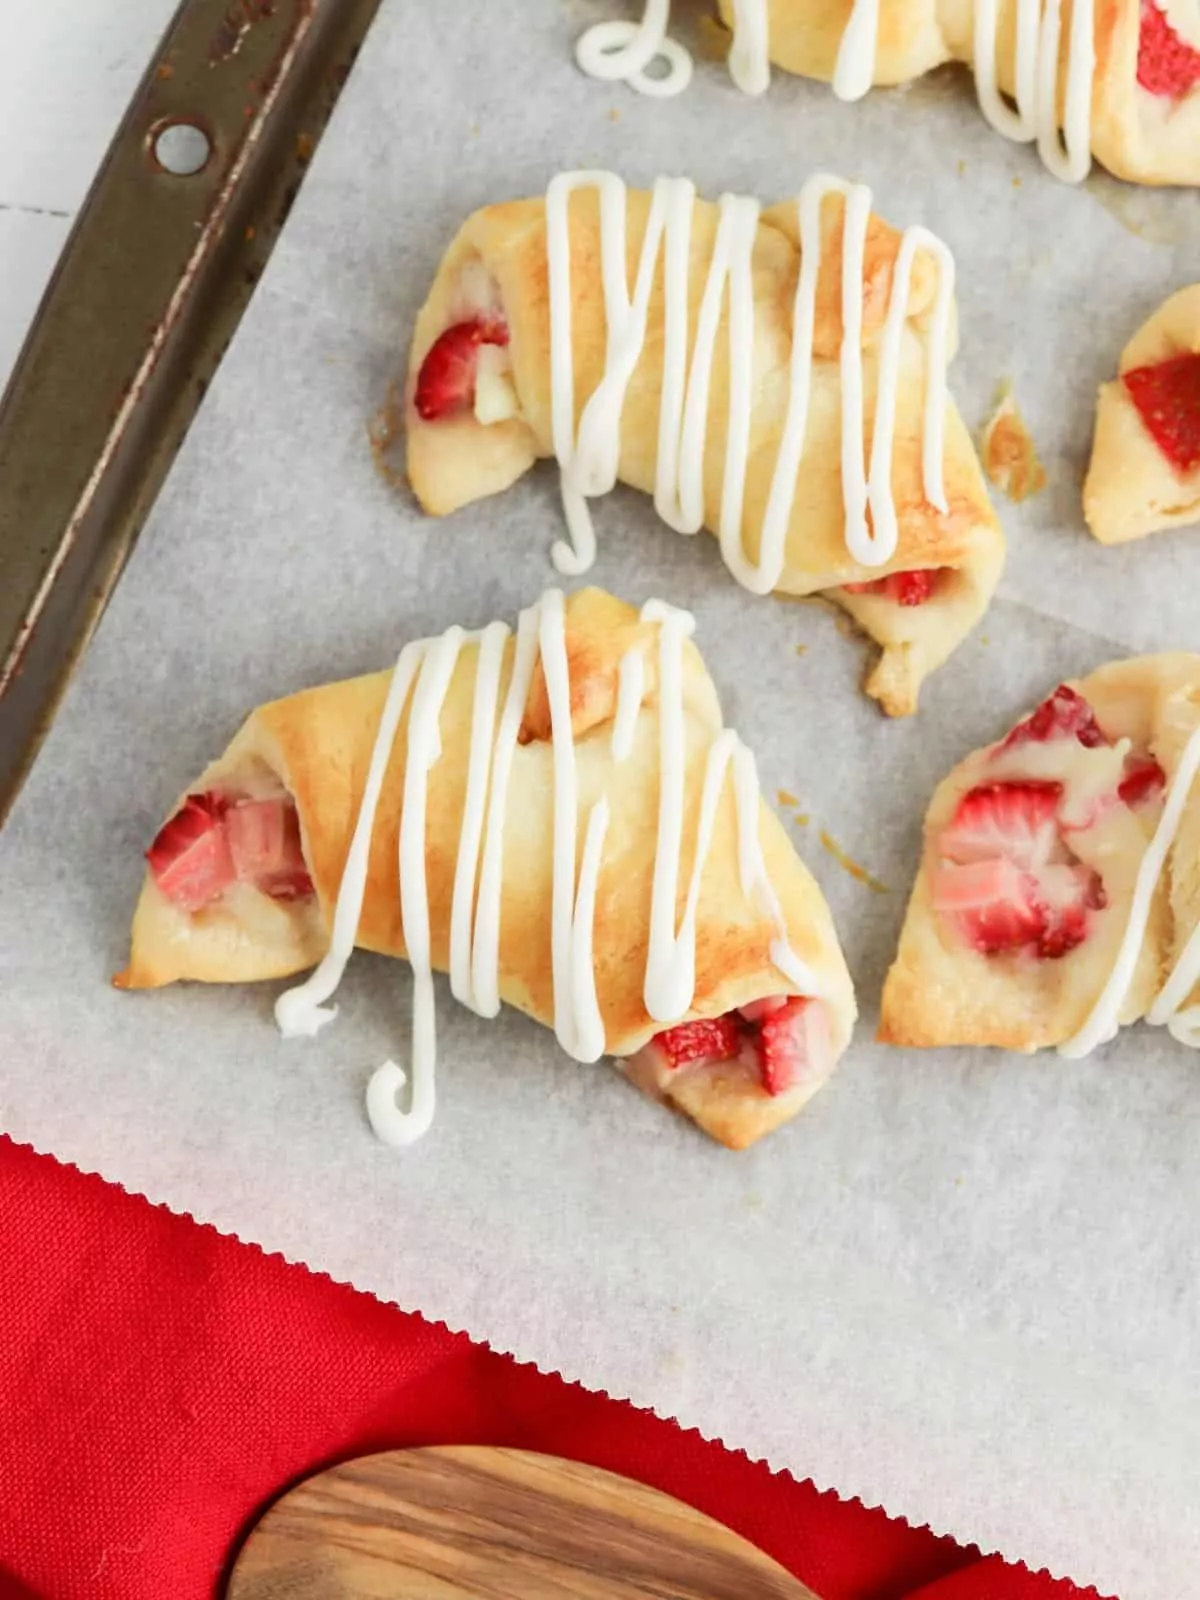 Crescent rolls filled with strawberries on baking tray.